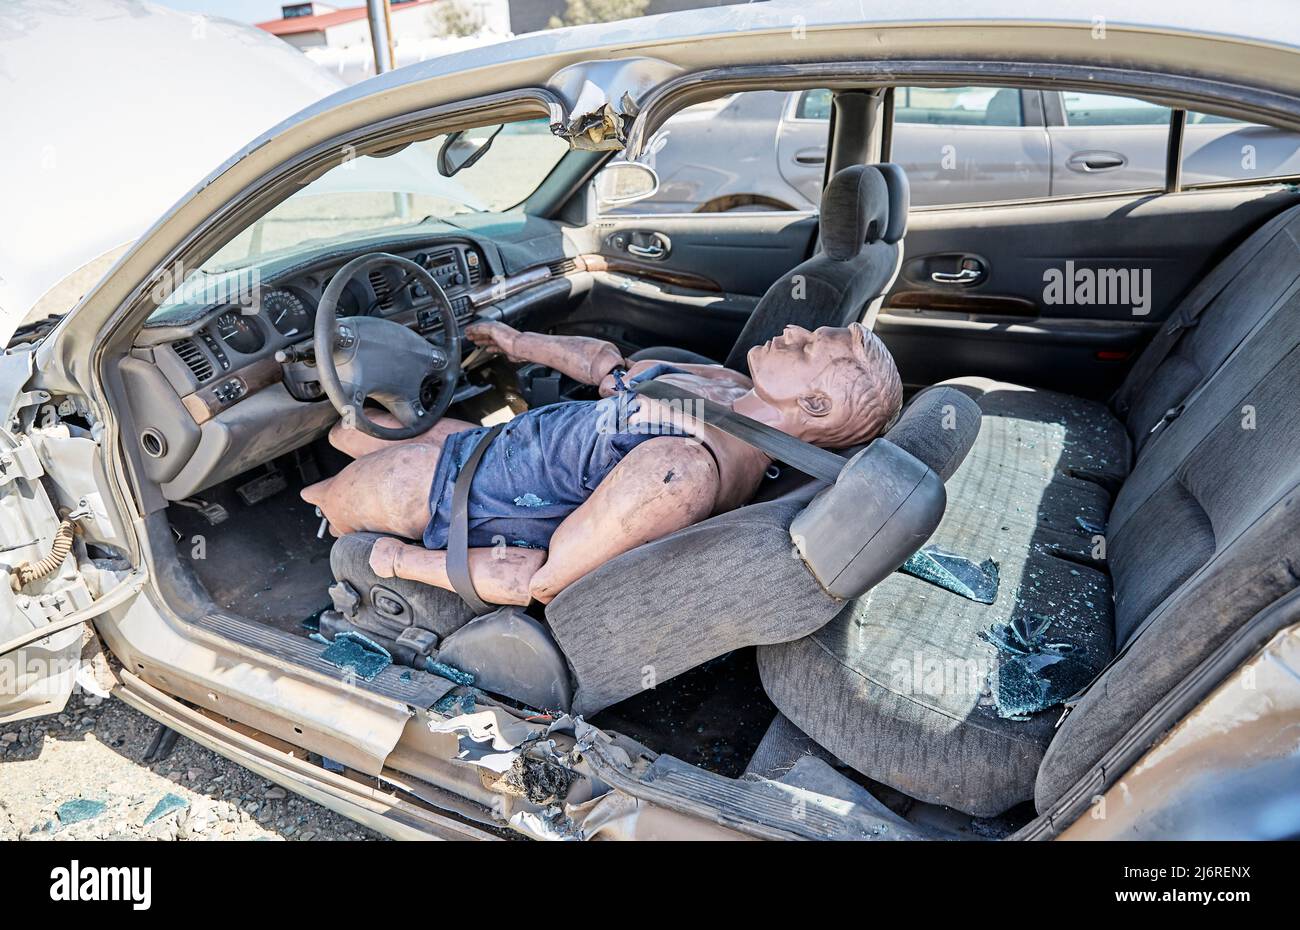 Practice Dummy in a crashed car for a demonstration Stock Photo